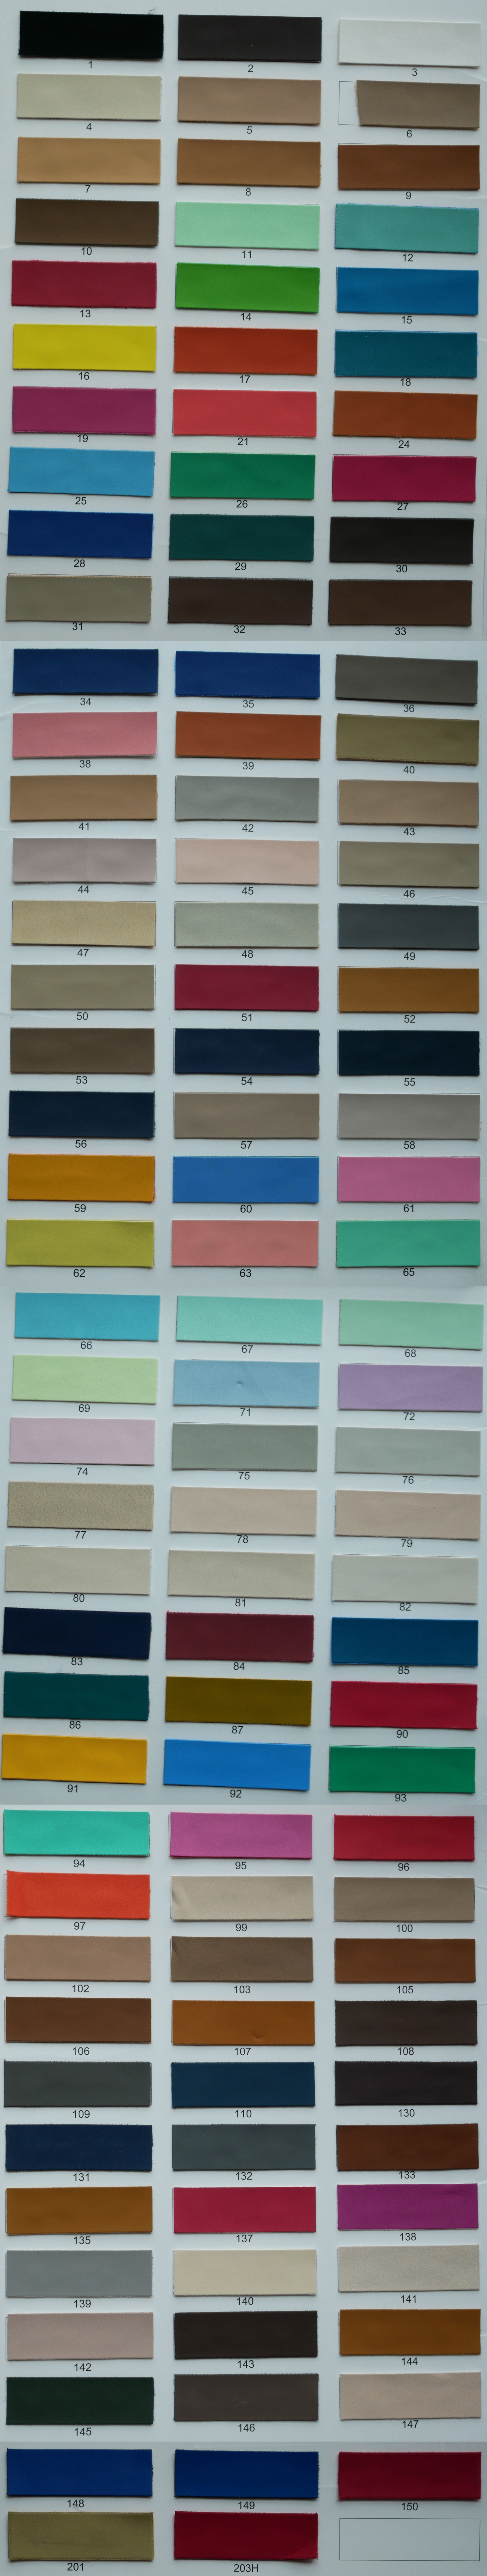 Color options for the leather label